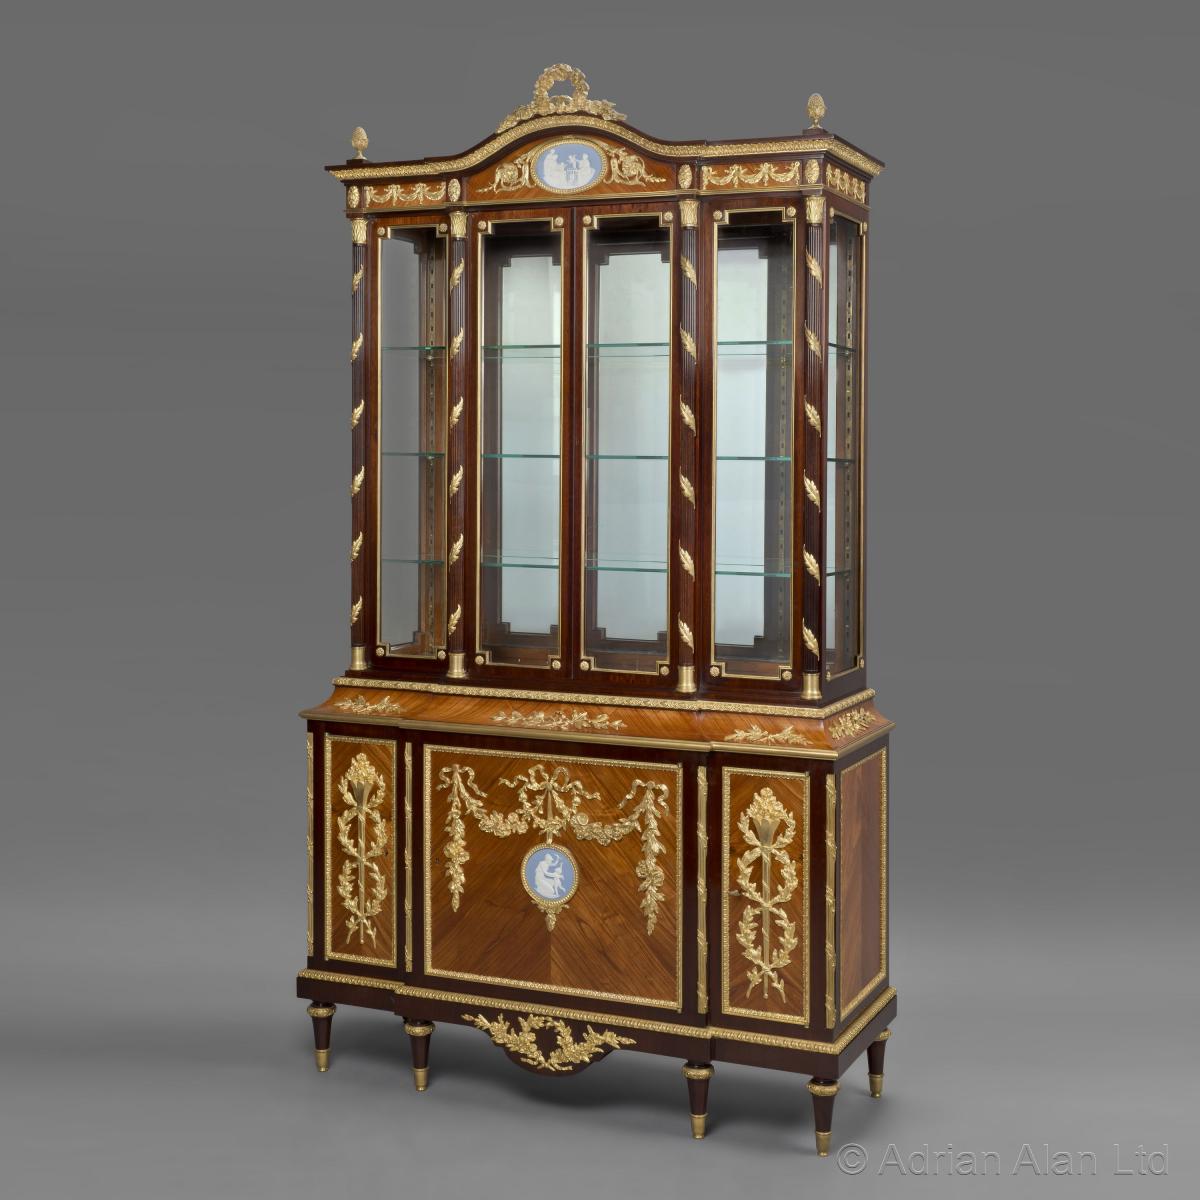 A Louis XVI Style Display Cabinet With Wedgwood Porcelain Plaques